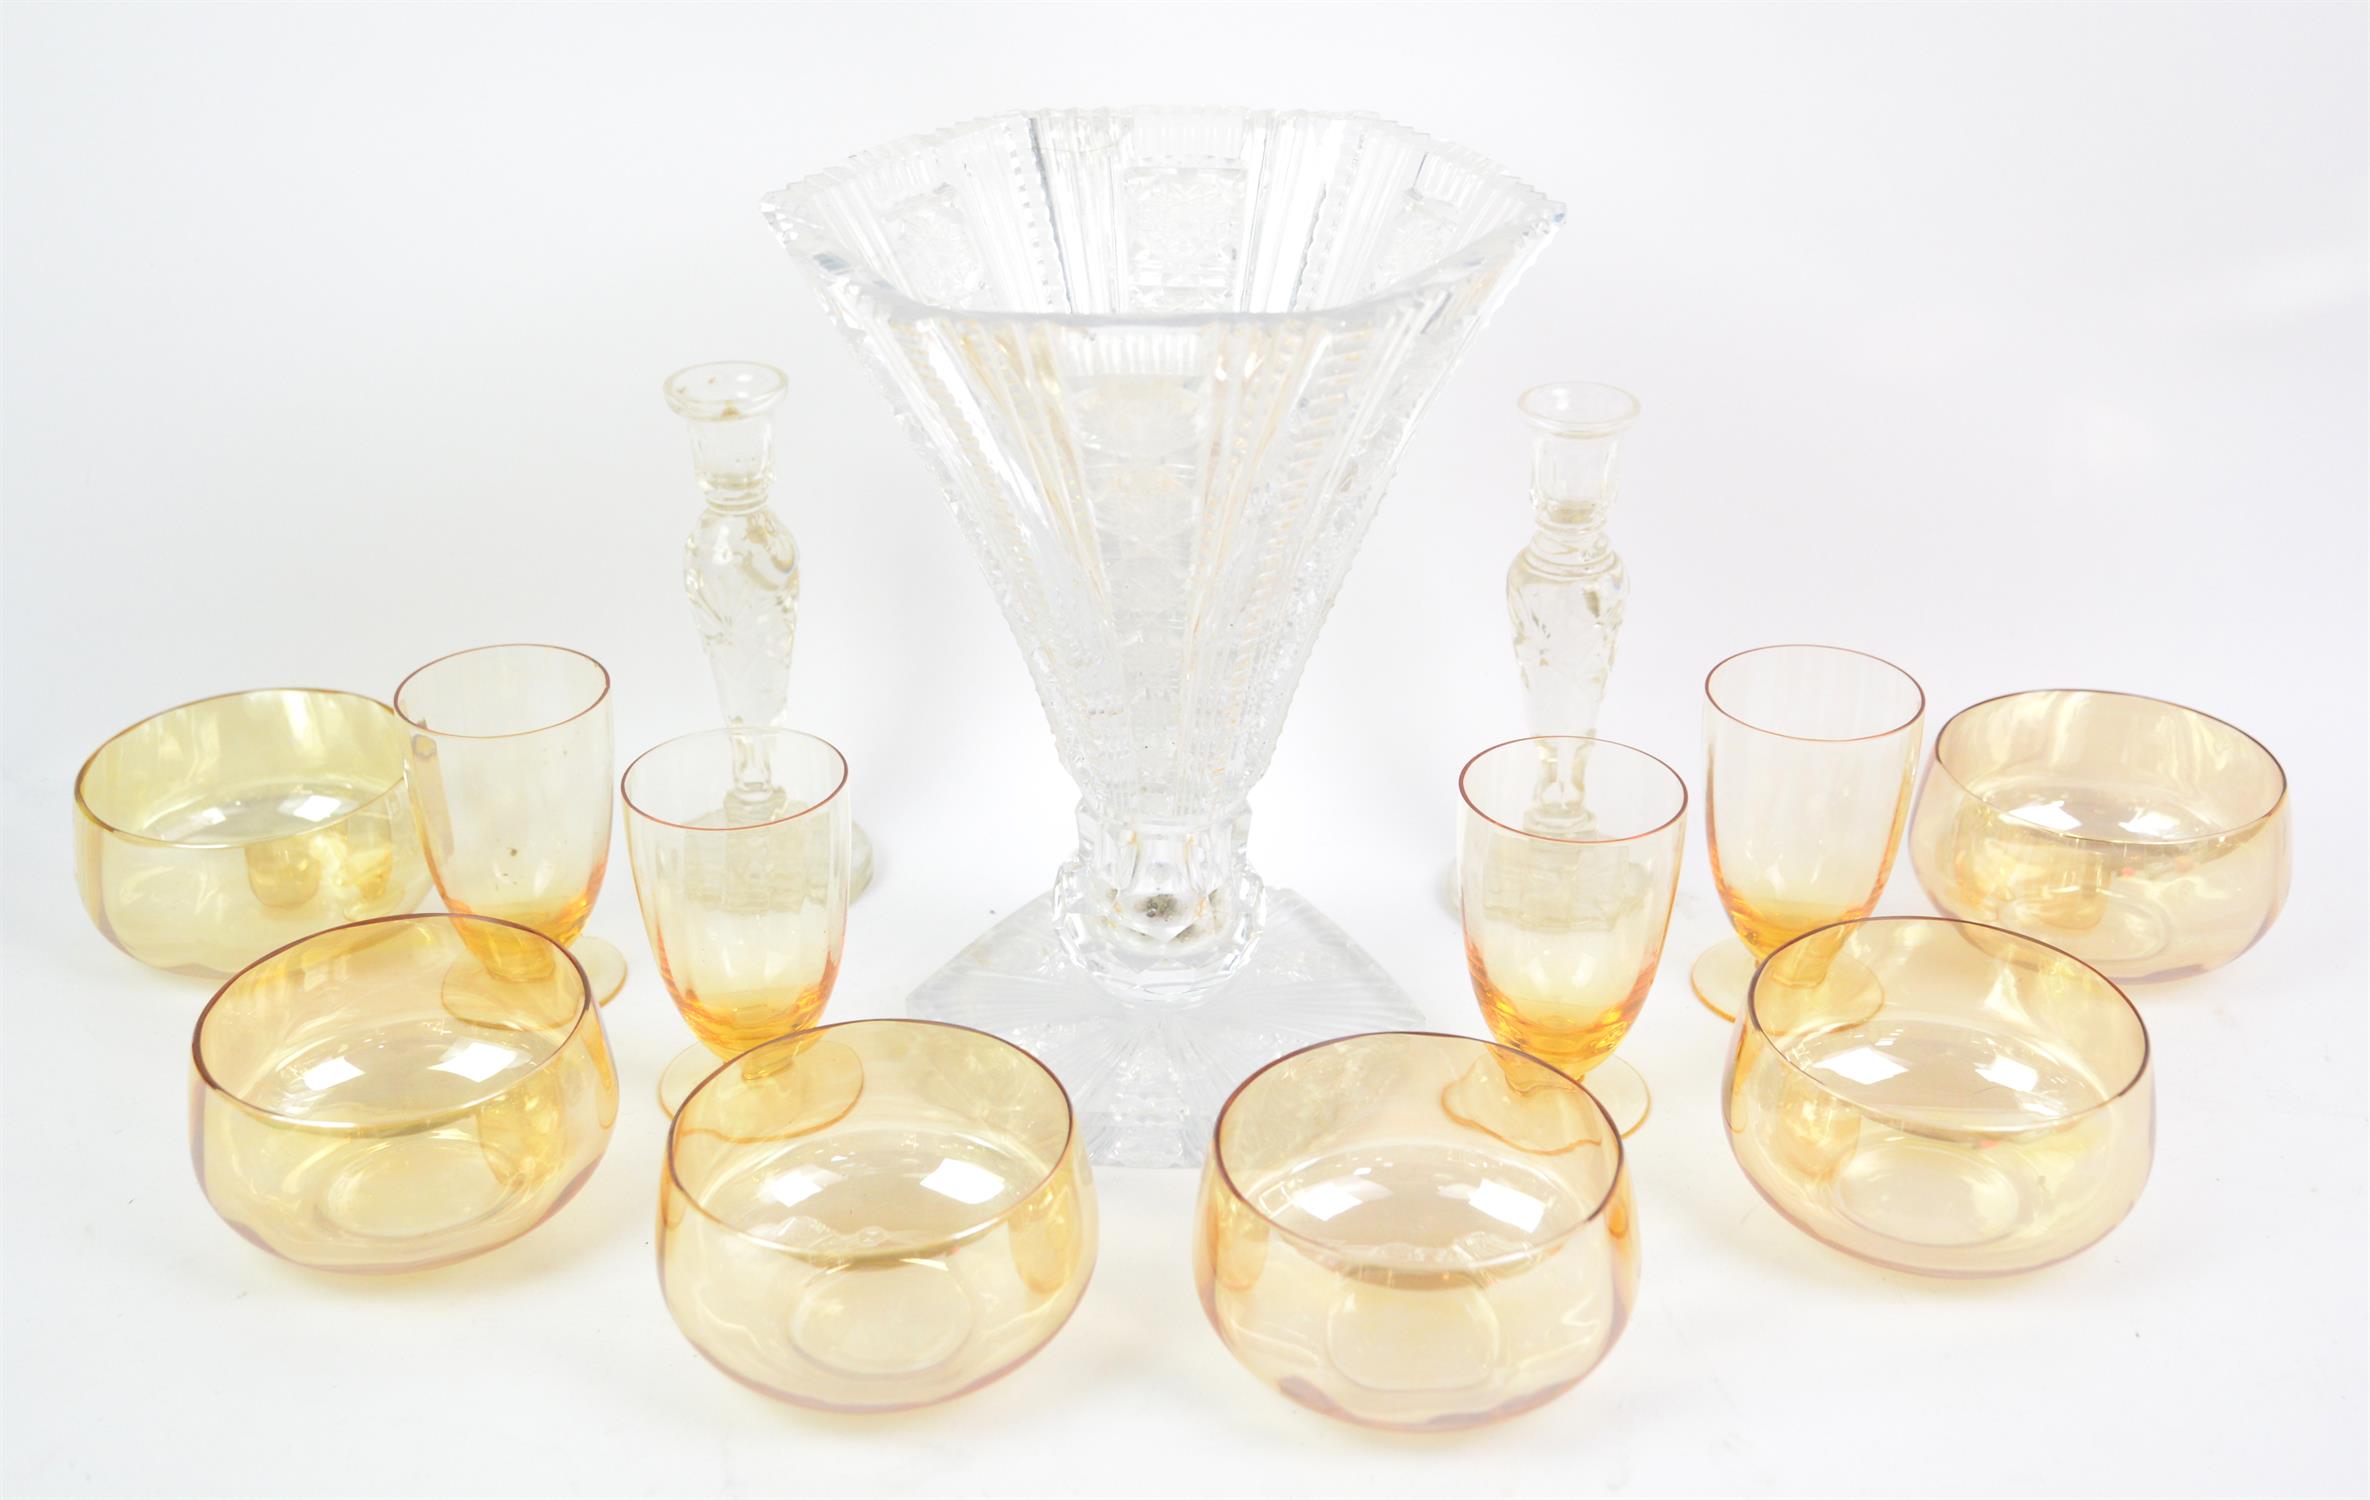 Glassware to include yellow glass bowls, clear glass candlesticks, dump weight, cut glass vase etc.